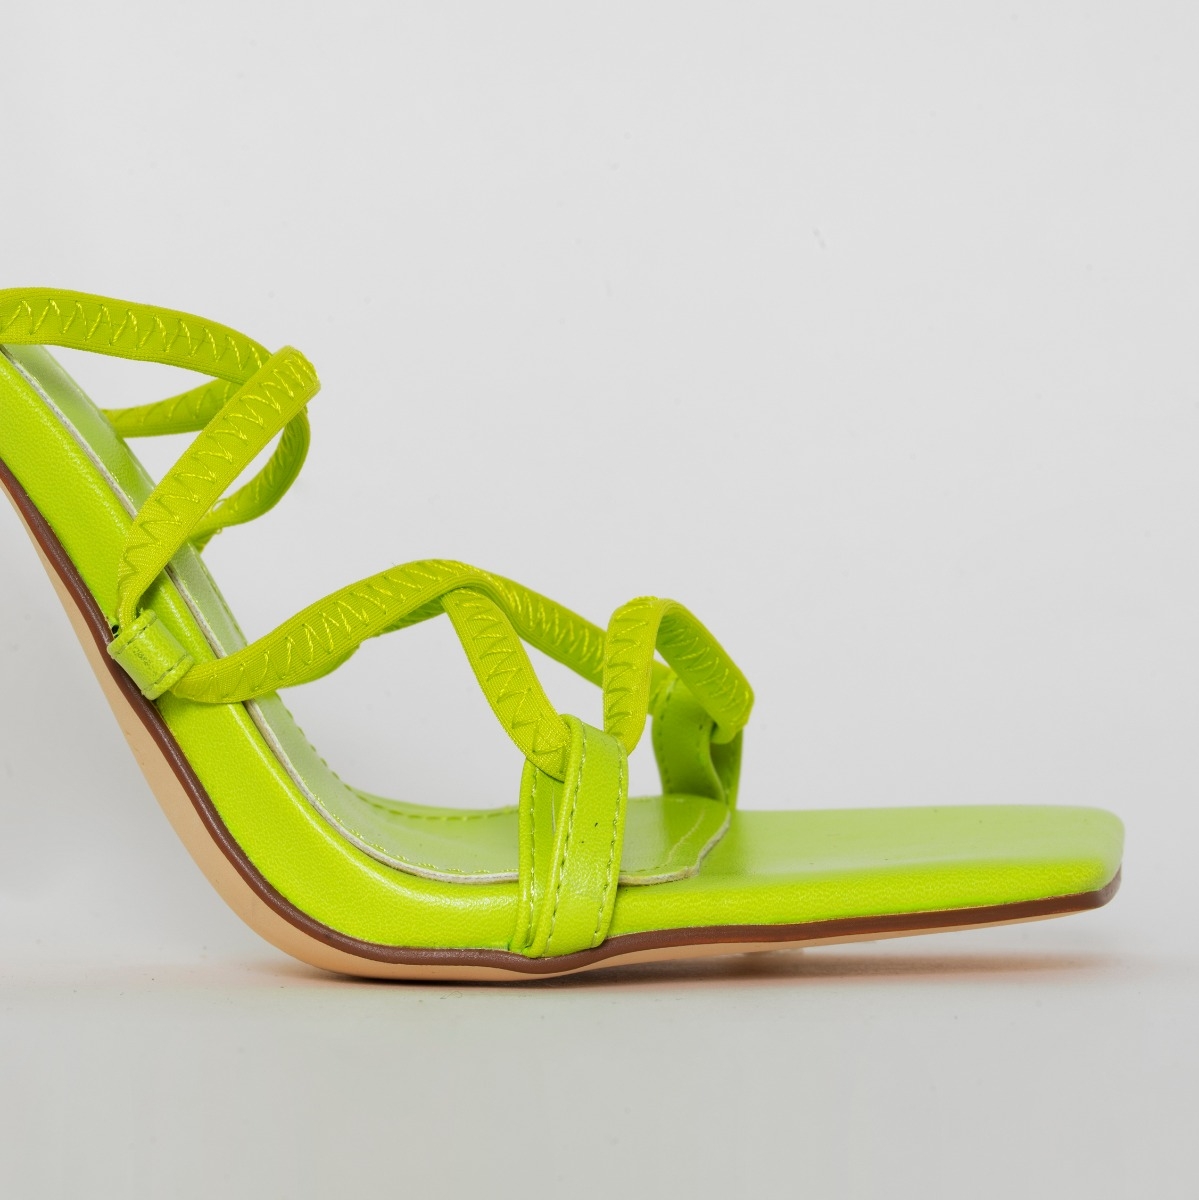 Clermont Twins Sis Neon Green Lace Up Stiletto Heels